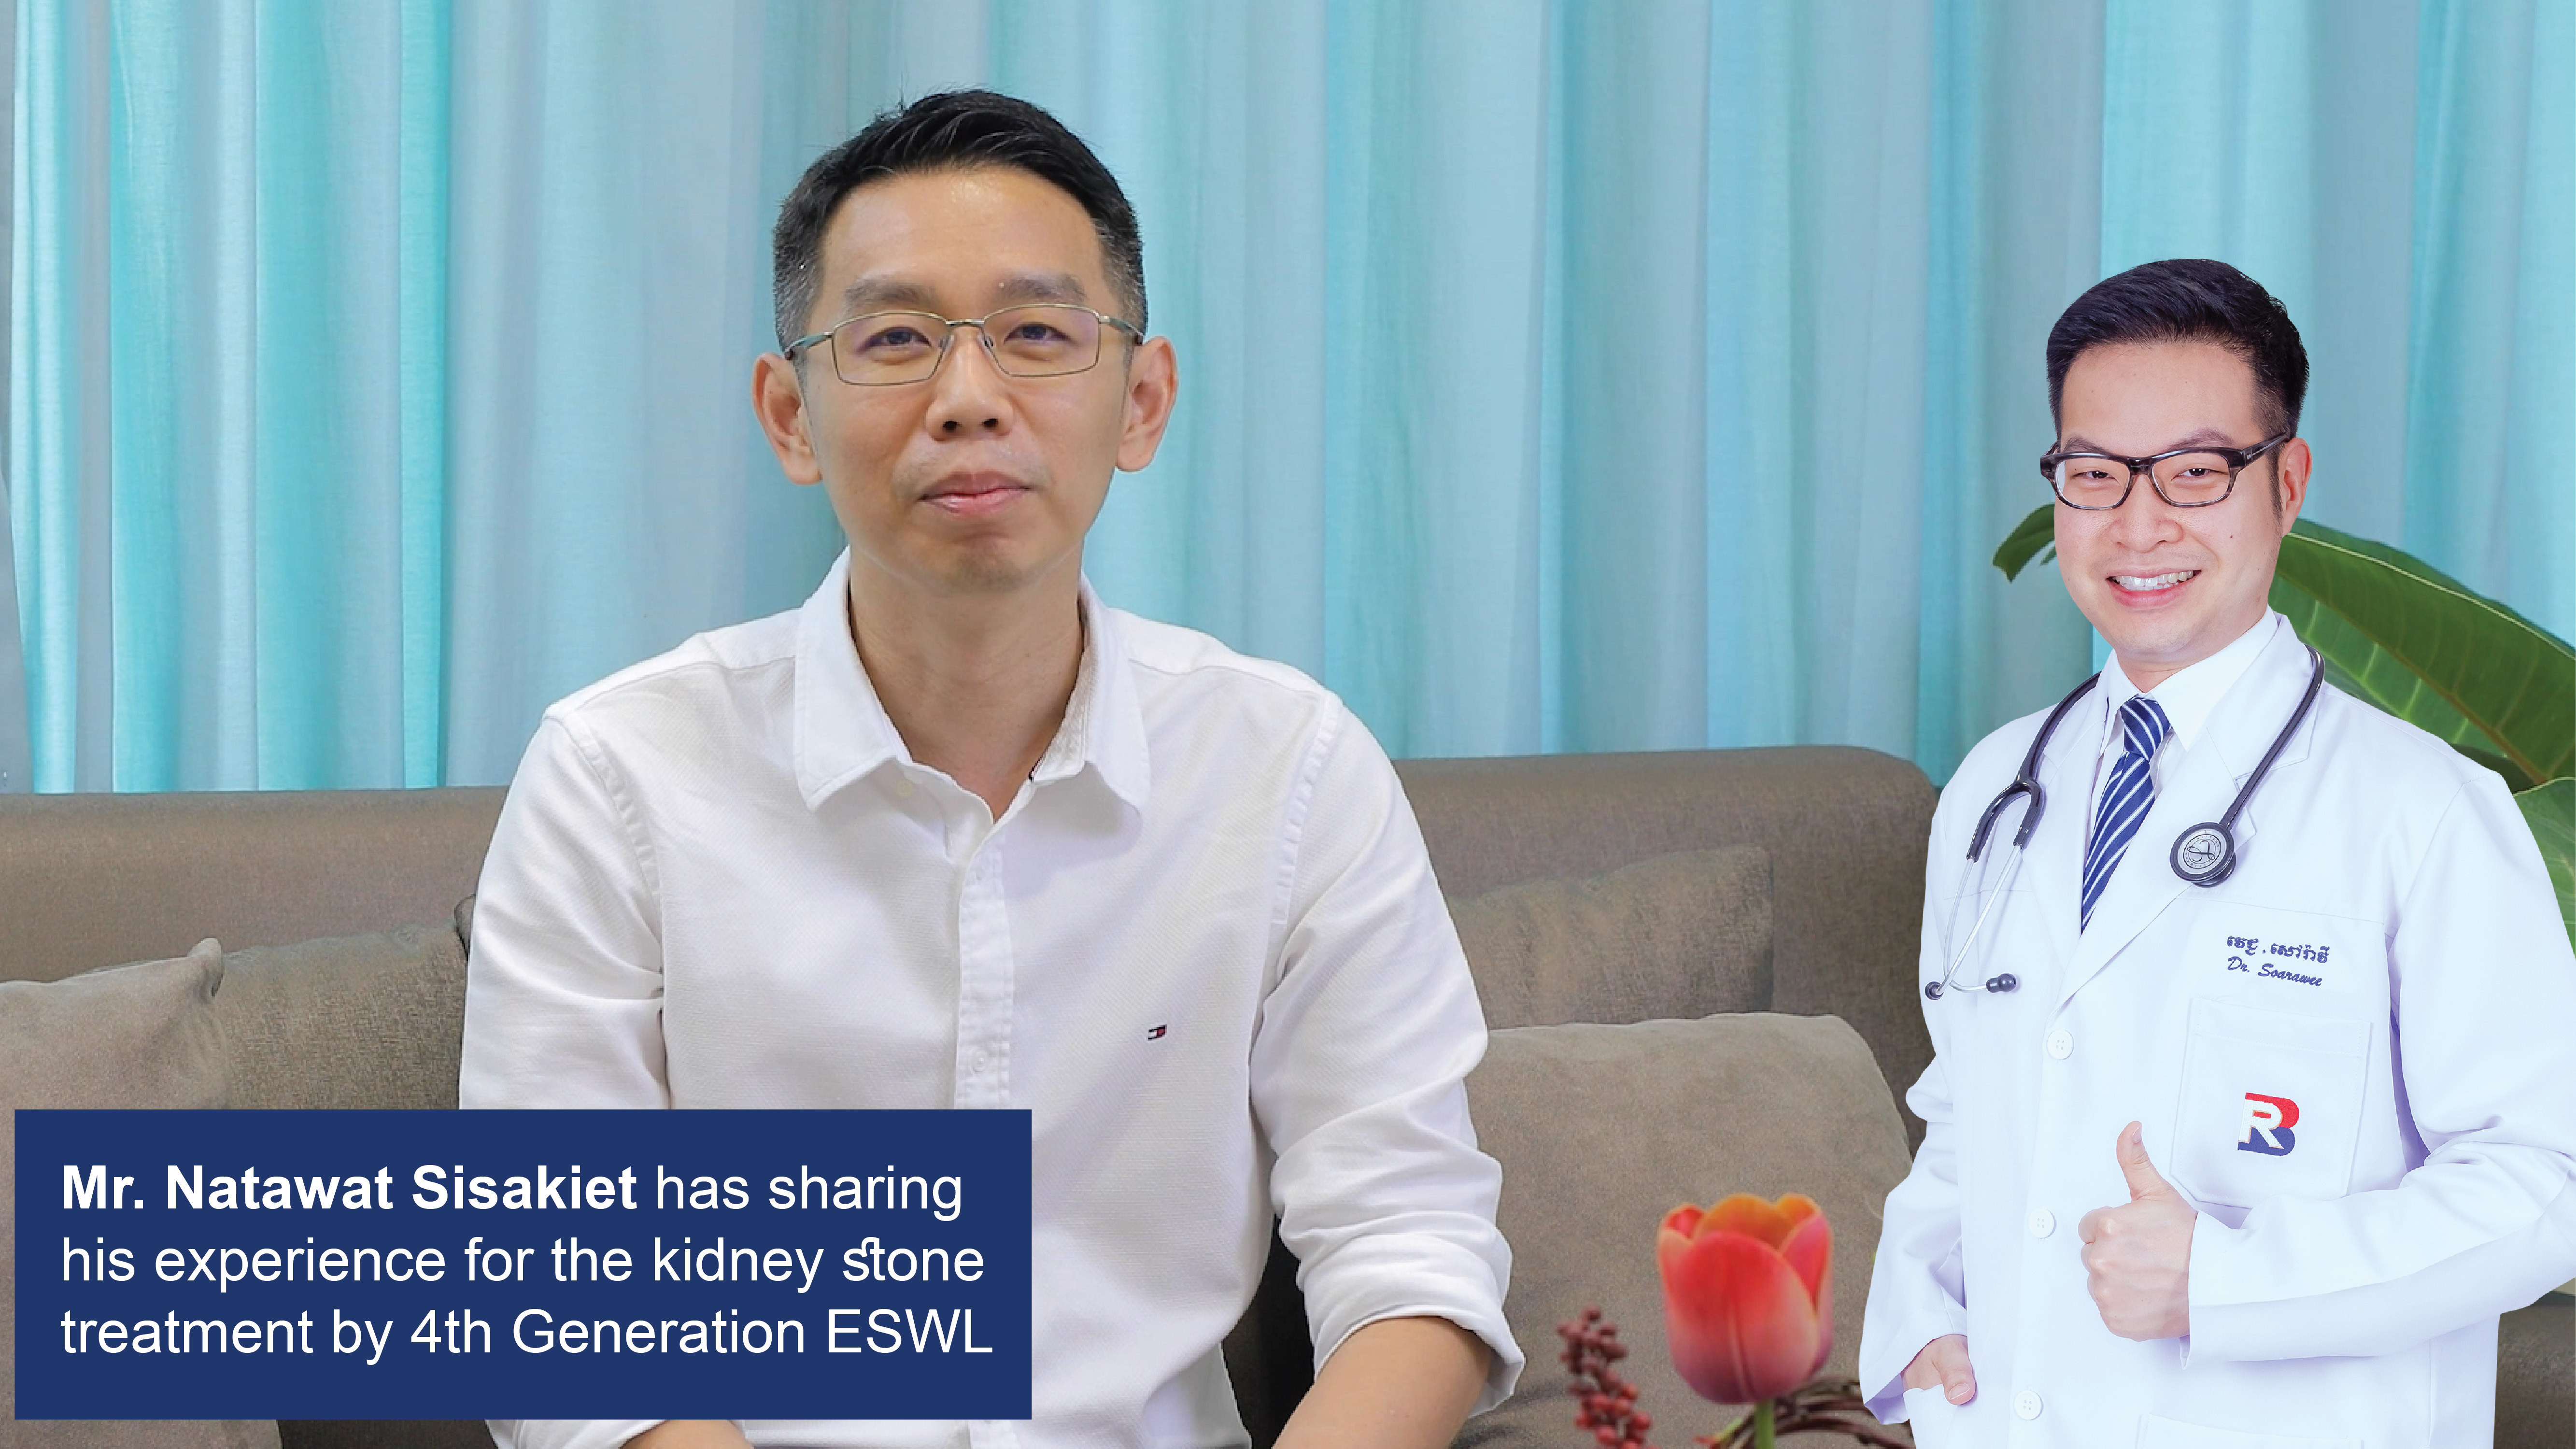 Mr. Natawat Sisakiet has sharing his experience for the kidney stone treatment by 4th Generation ESWL